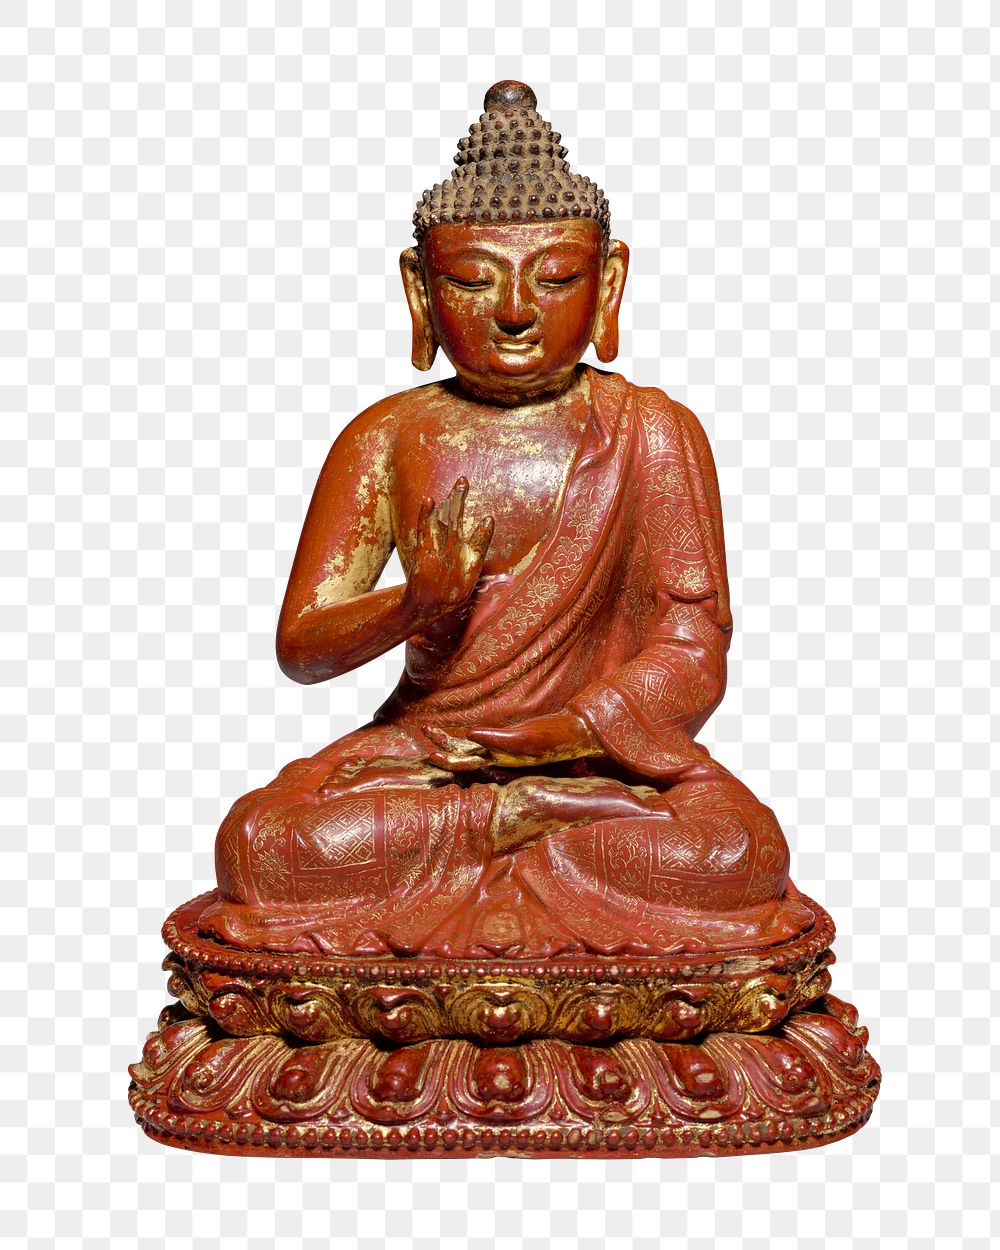 Amoghasiddhi Buddha png, Chinese religious statue on transparent background.    Remastered by rawpixel